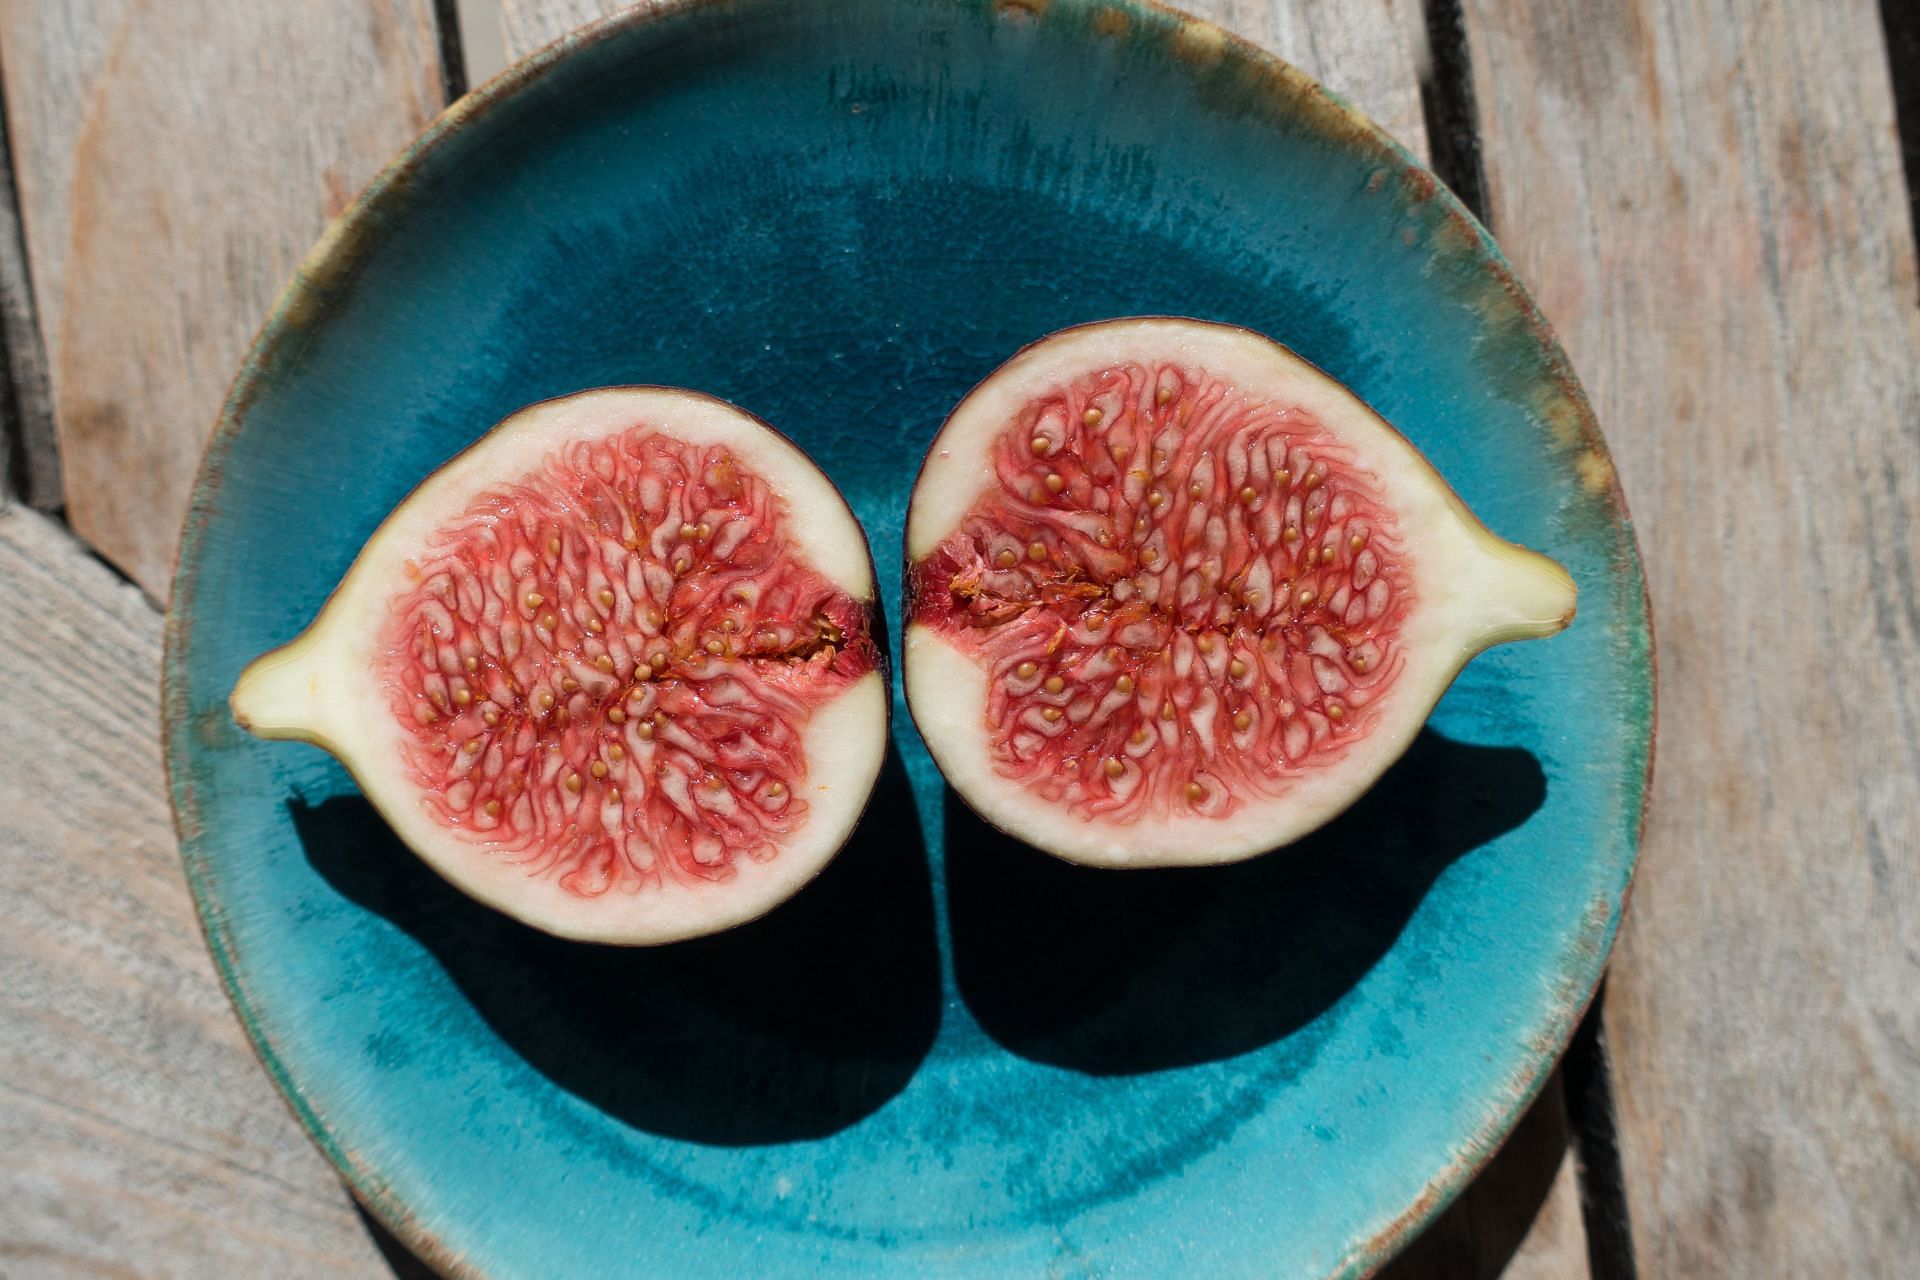 There are many health benefits of figs that are extremely beneficial for all people, including diabetics (Image via Pexels @Pixabay)